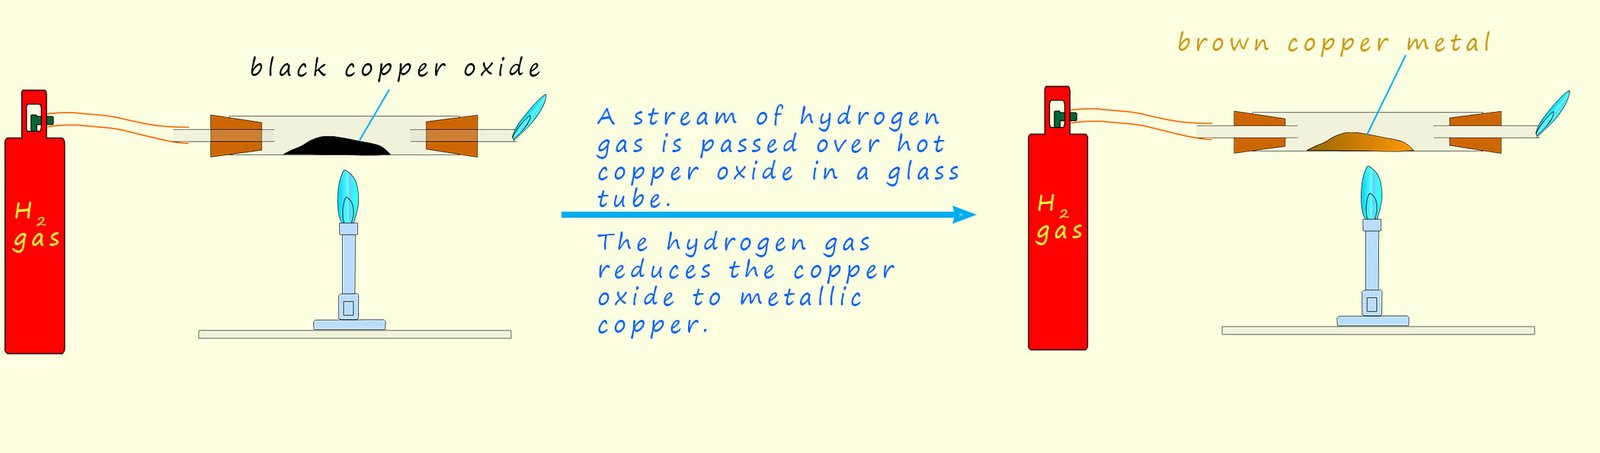 Diagram to show the reduction of copper oxide using hydrogen gas.